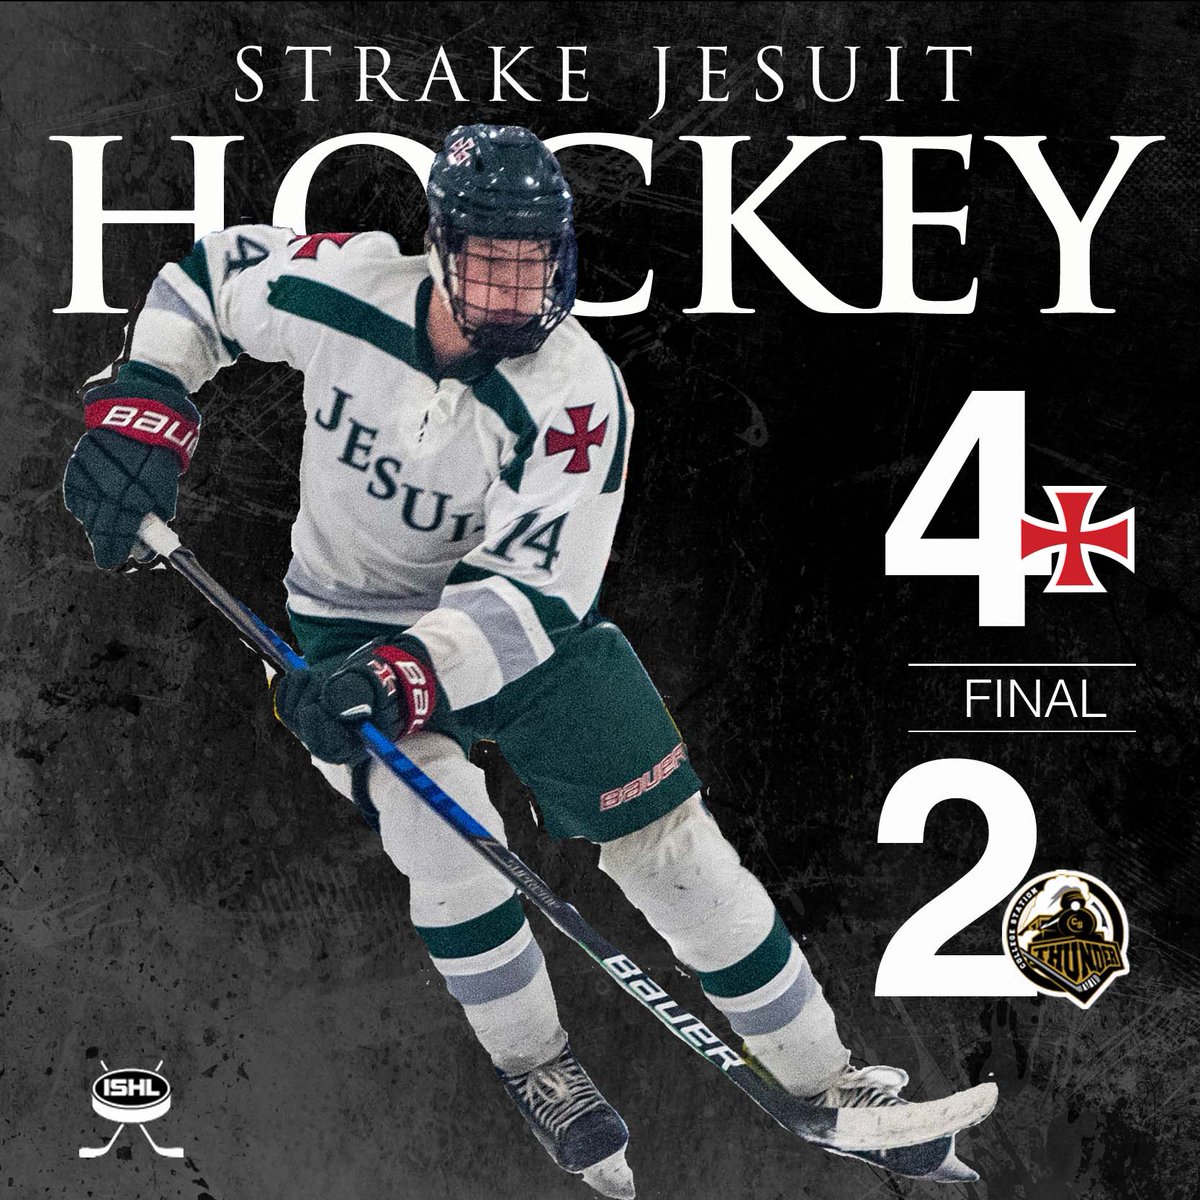 @strakejesuithockey defeated College Station last night 4-2. David Rheaume ’26 lead all scorers with 2 G &1 A. Topher Smith '24 was 21/23 shots for a 92% save percentage. Nolan Aufdenspring '26 and Luke Depue '27 each netted a goal.